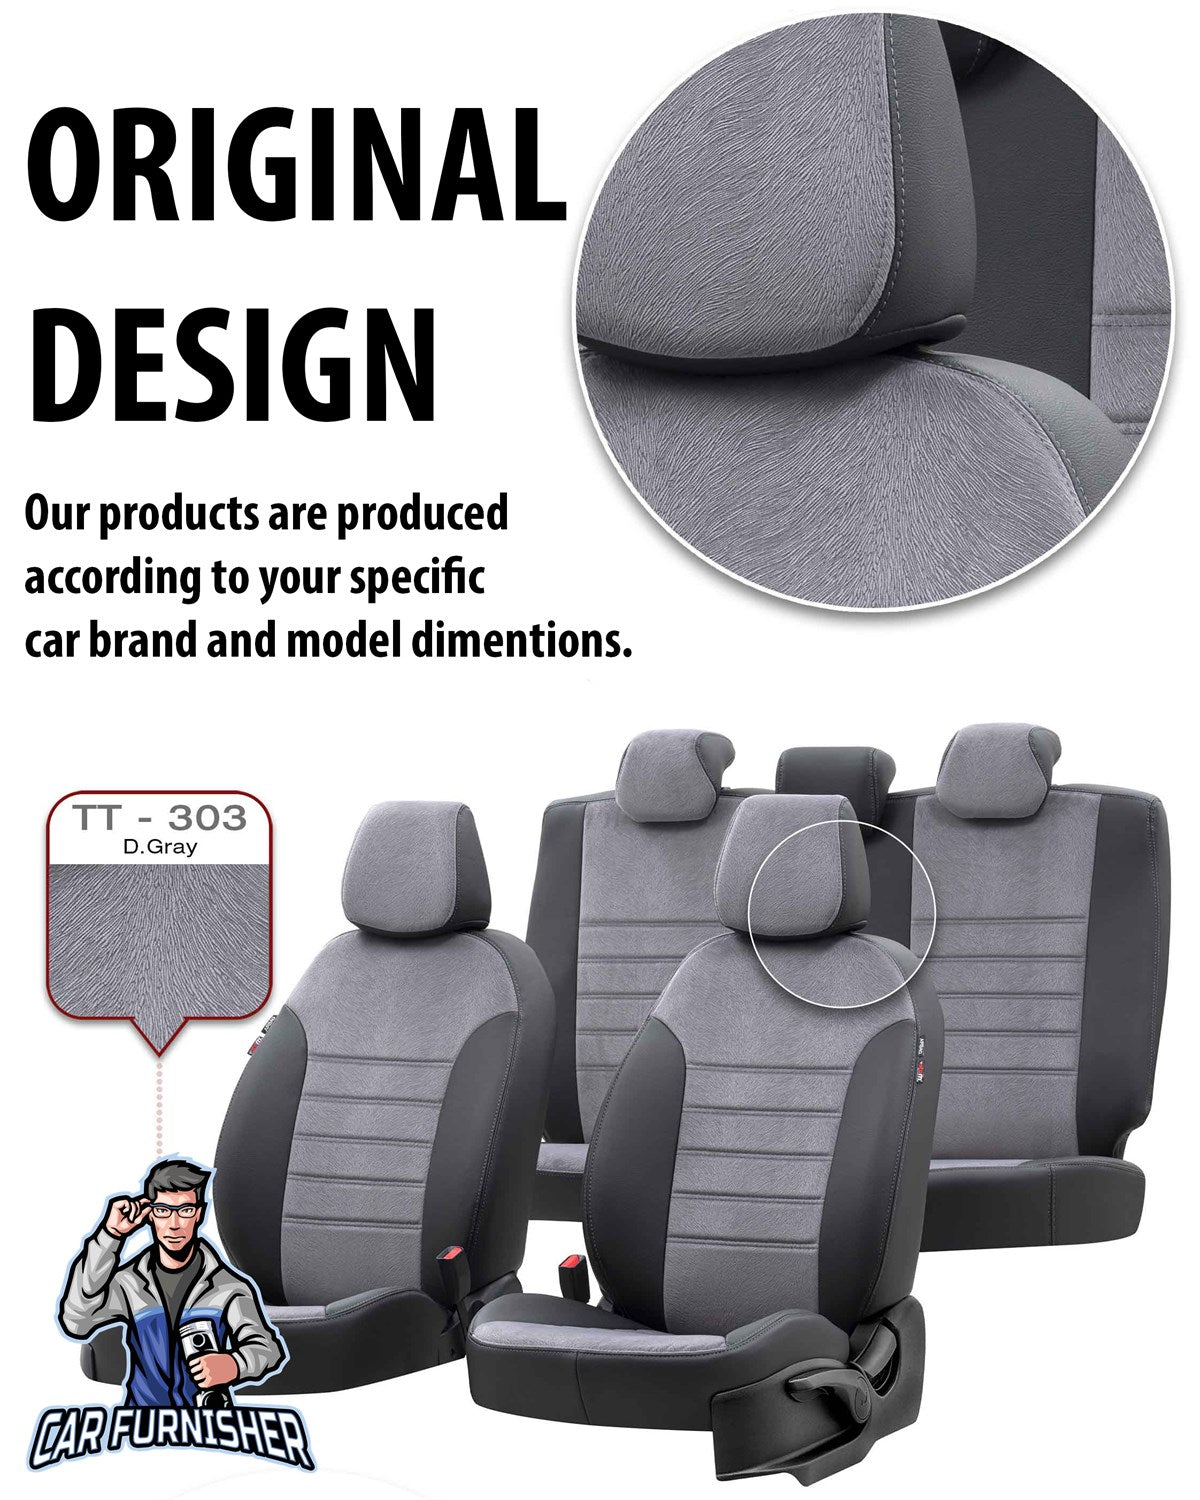 Isuzu Nkr Seat Covers London Foal Feather Design Smoked Black Leather & Foal Feather